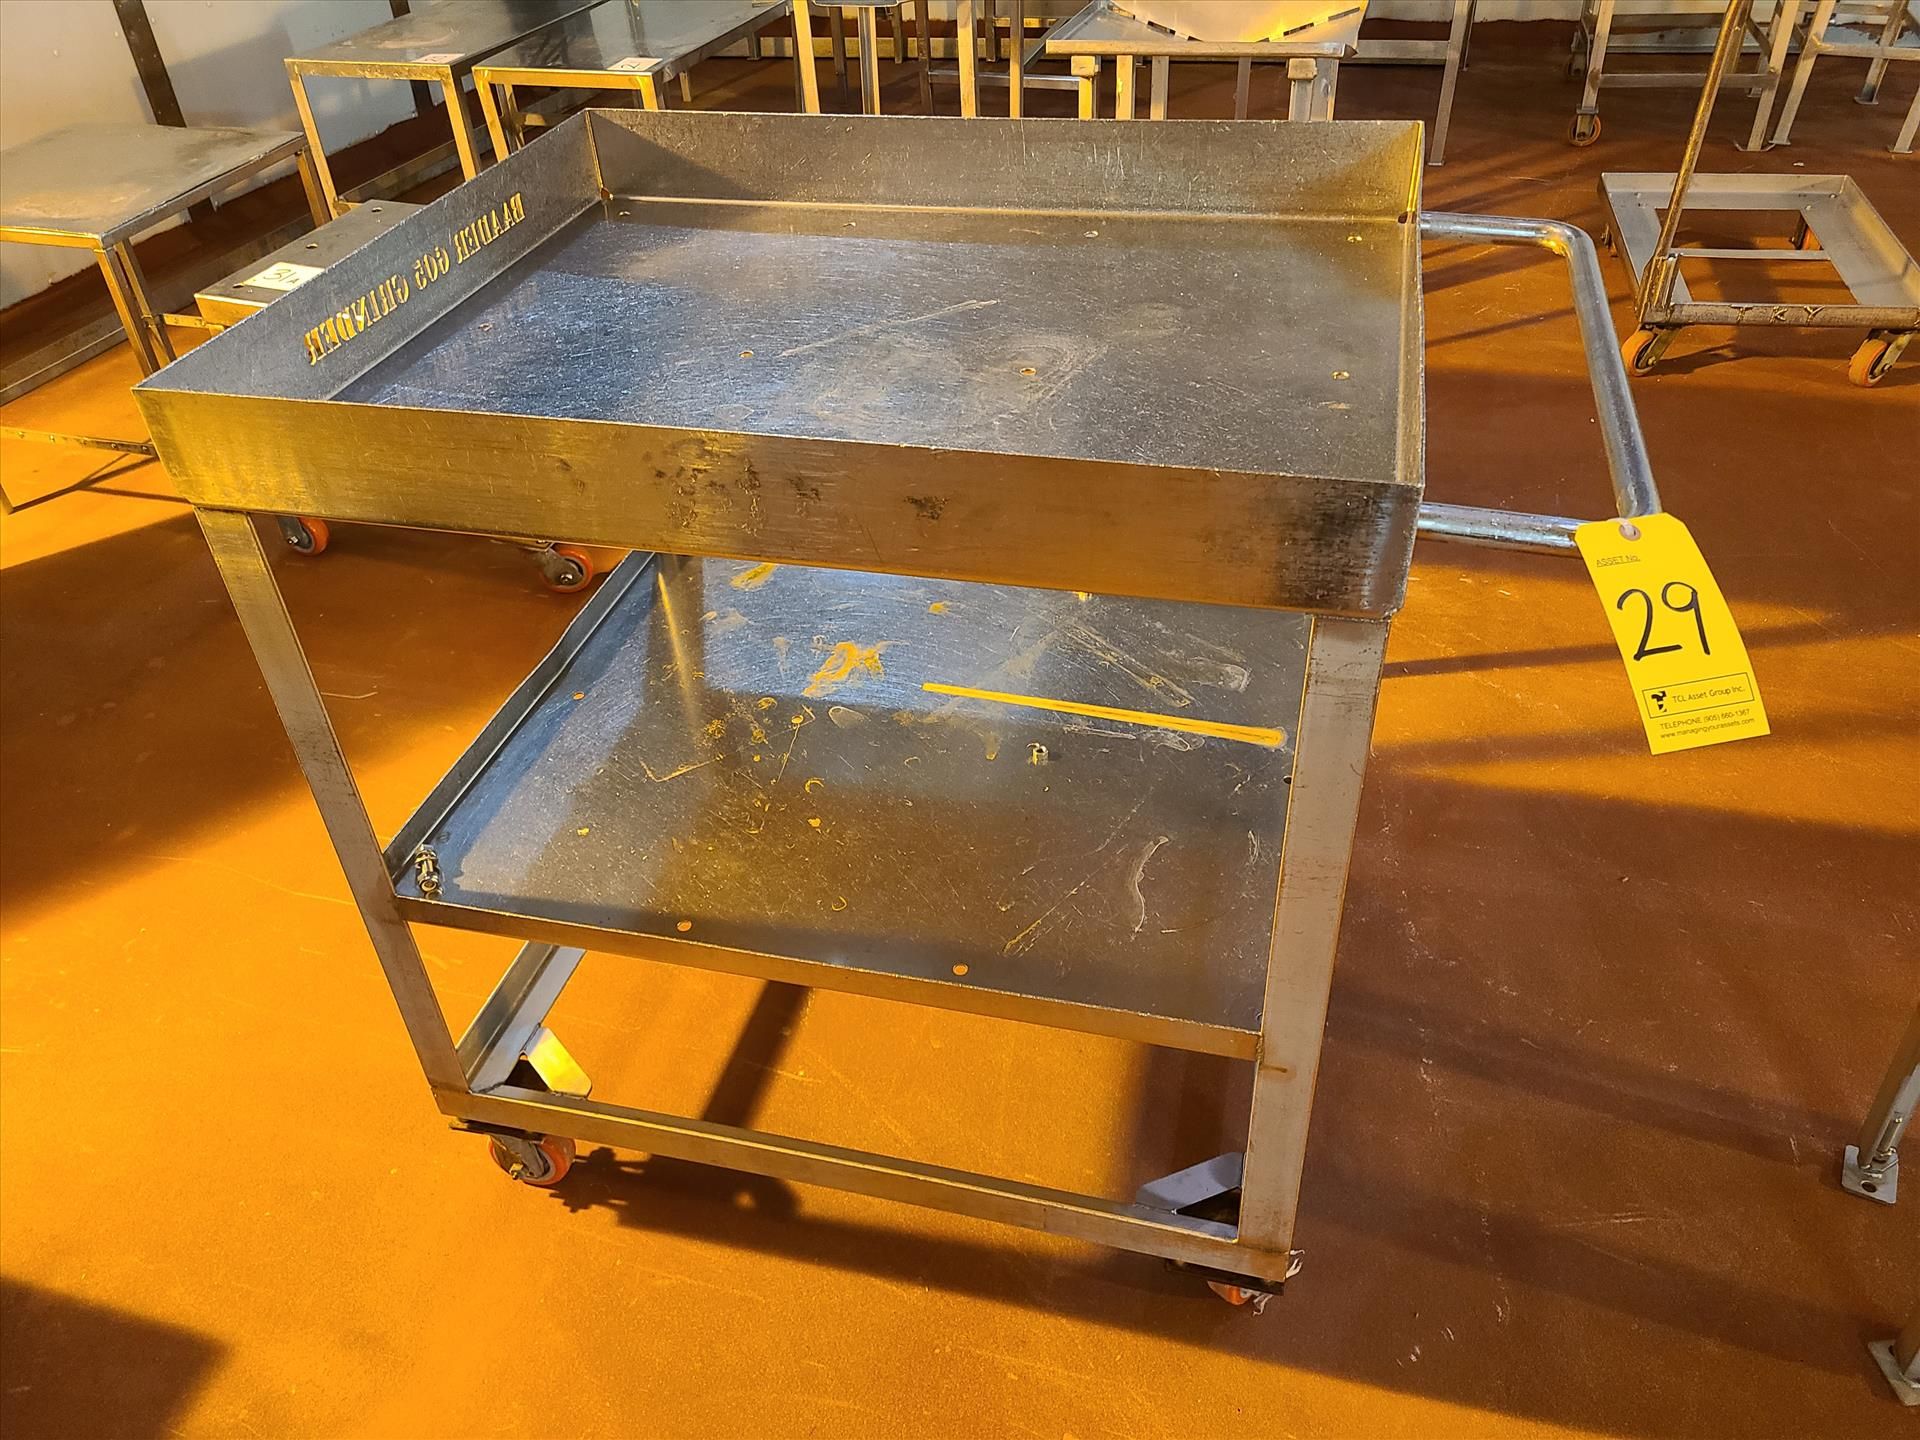 Cart, stainless steel, casters, two tier [Loc. Anti-Cut-Up]